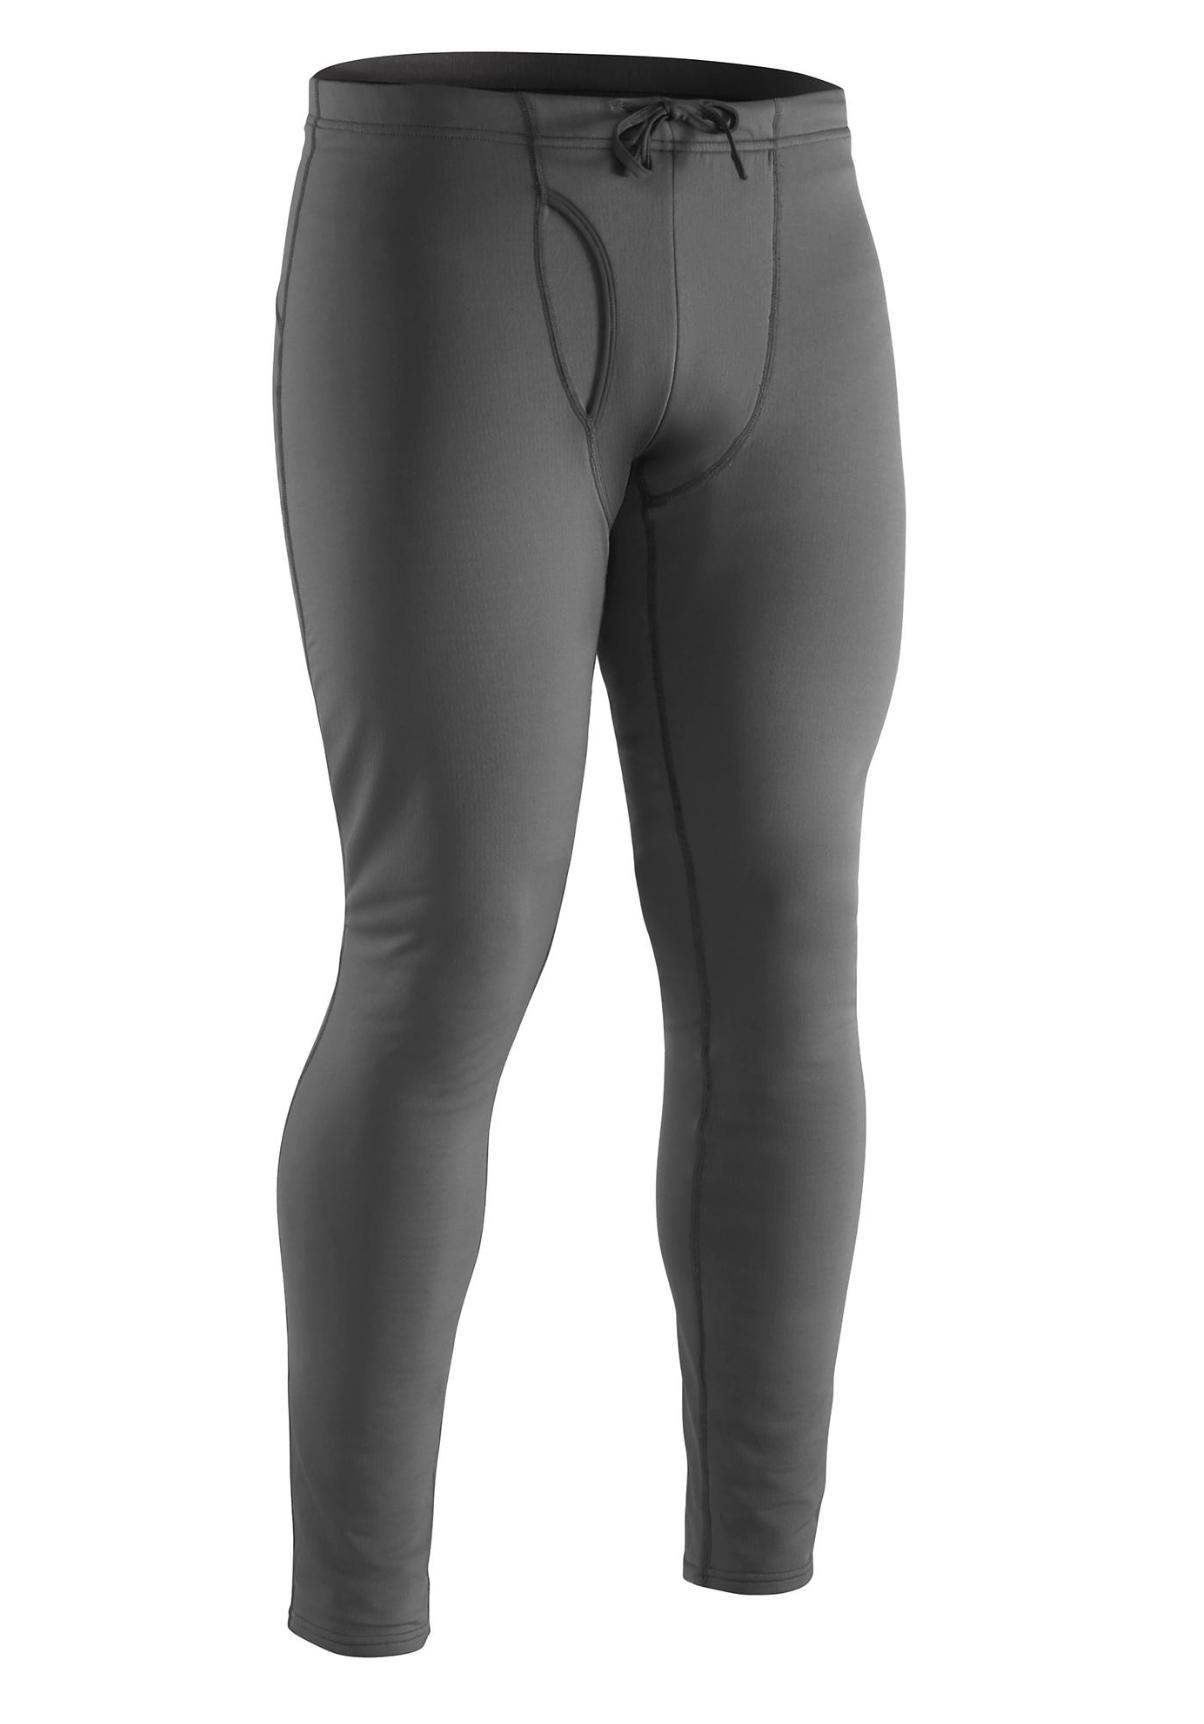 Layering: Men's H2Core Lightweight Pant by NRS - Image 4807